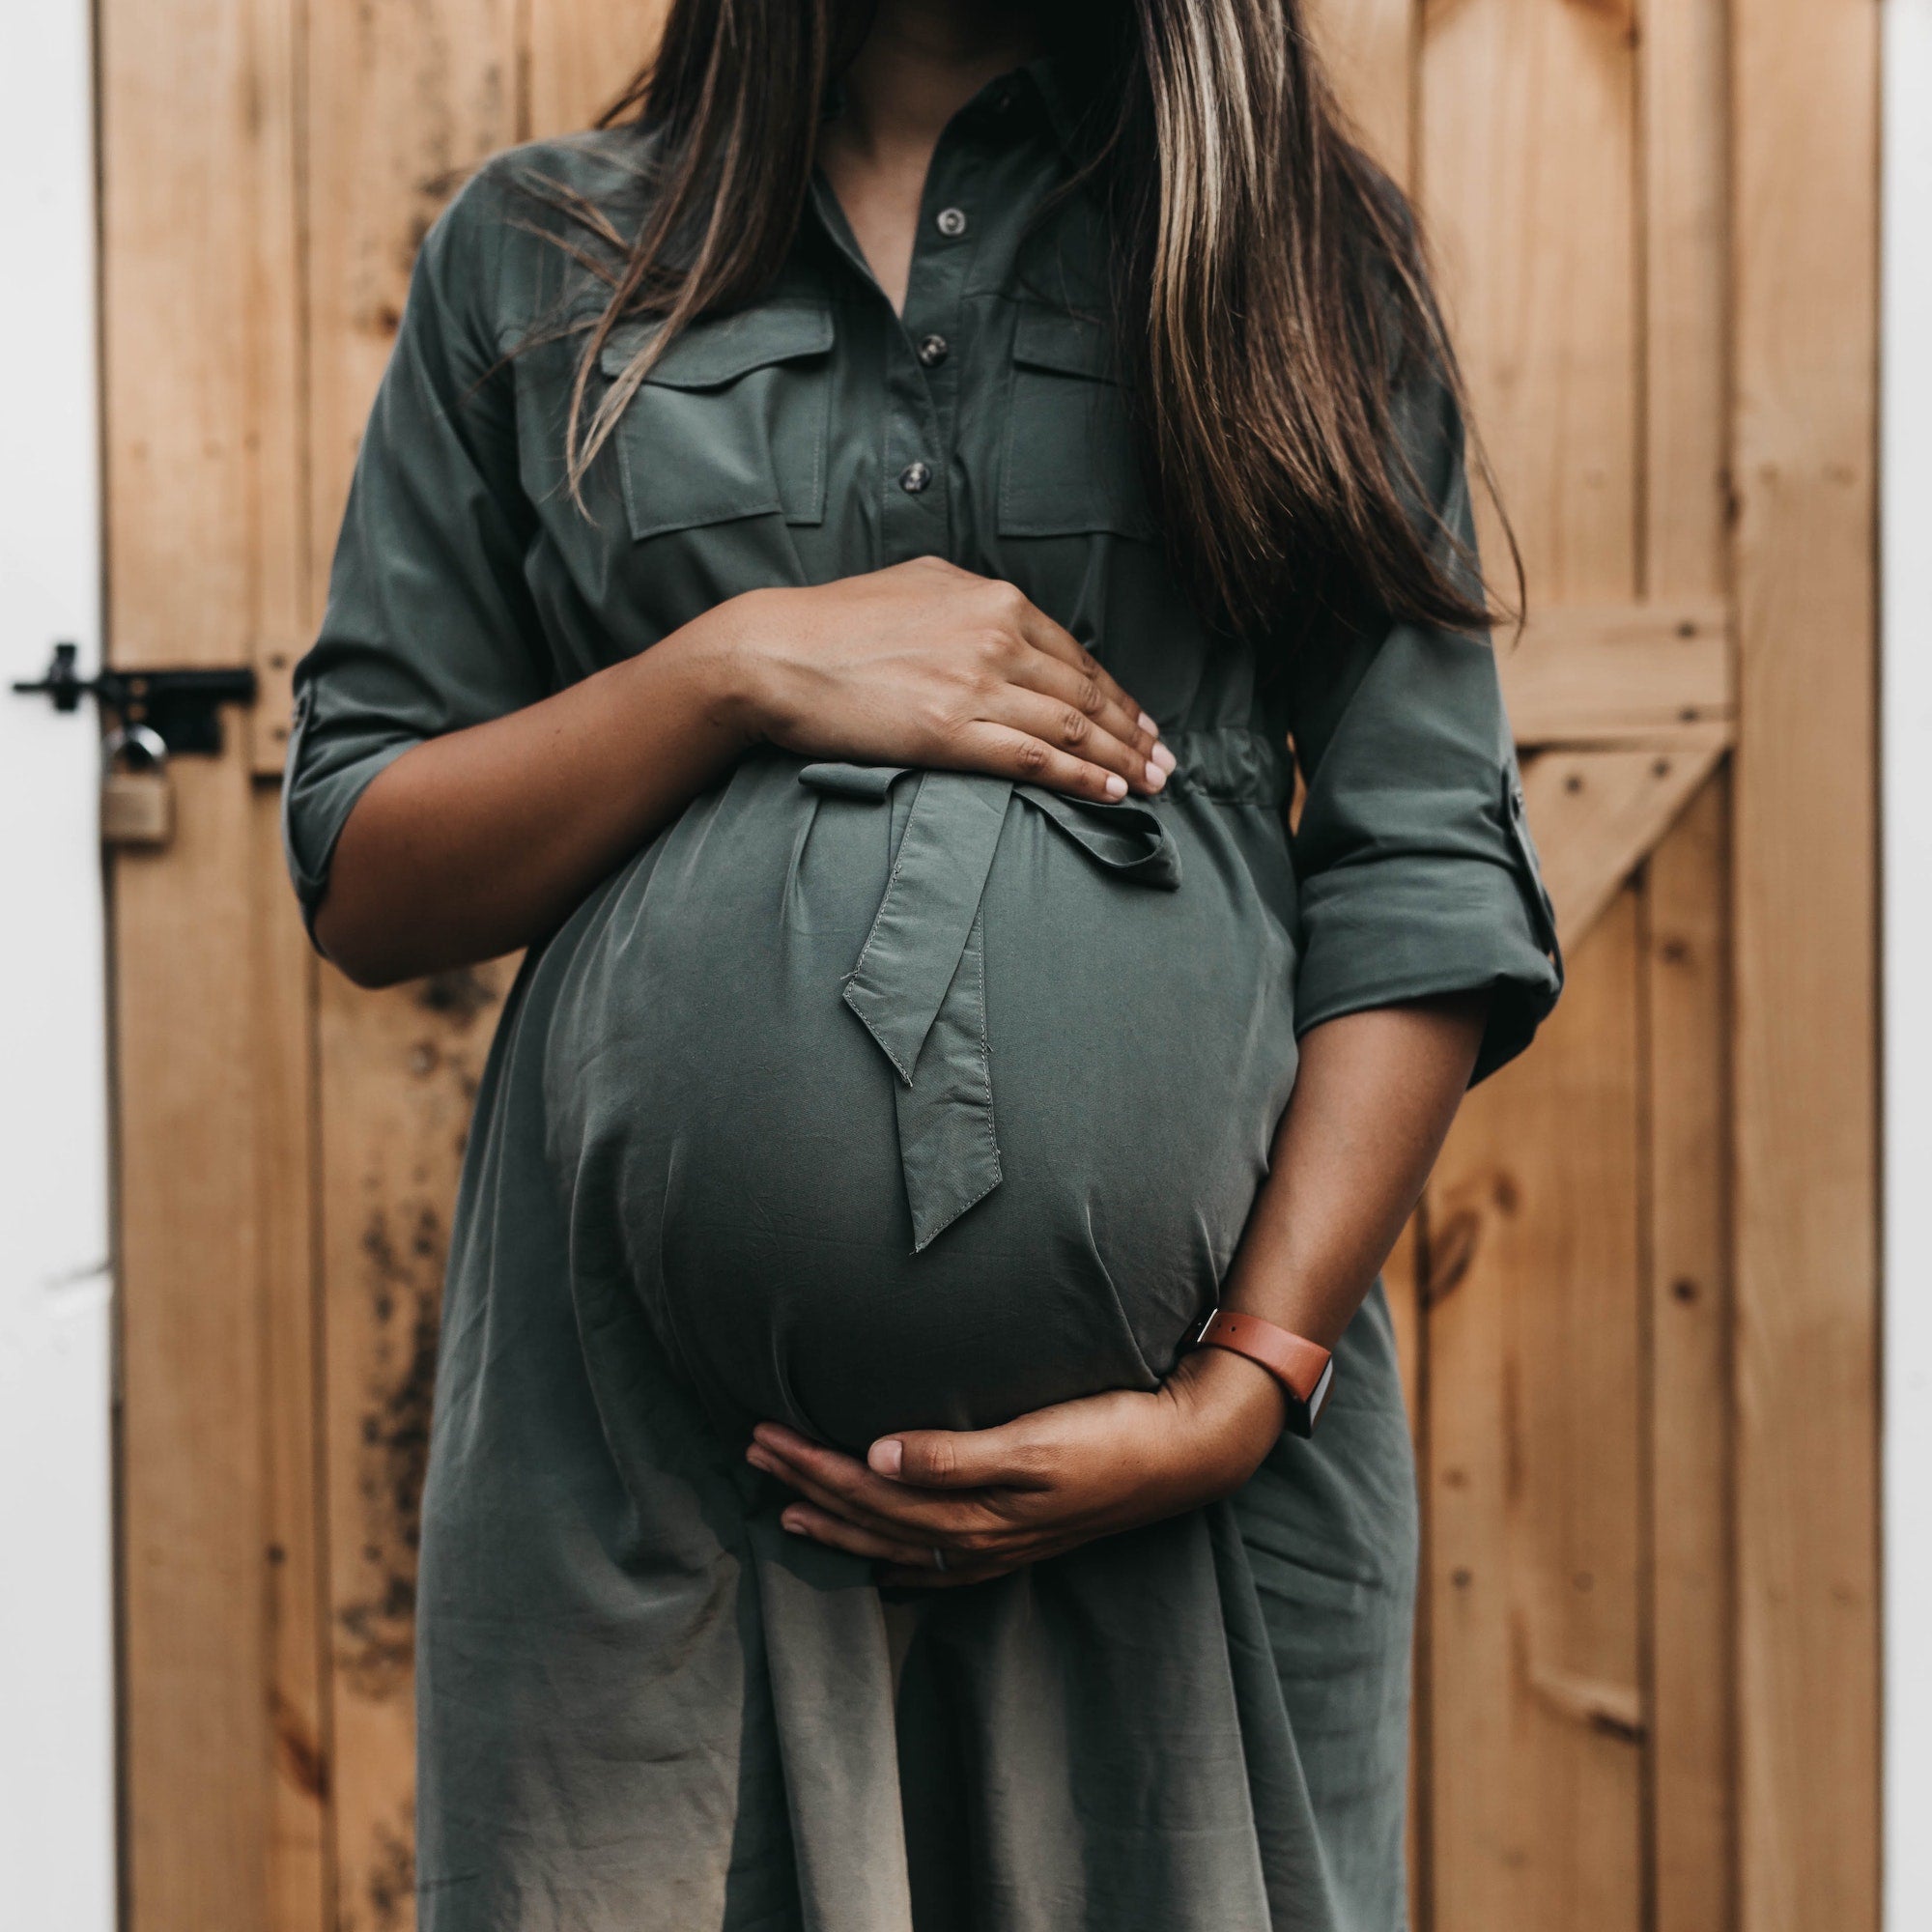 7 Startling Stats about WOC and Pregnancy you Need to Know